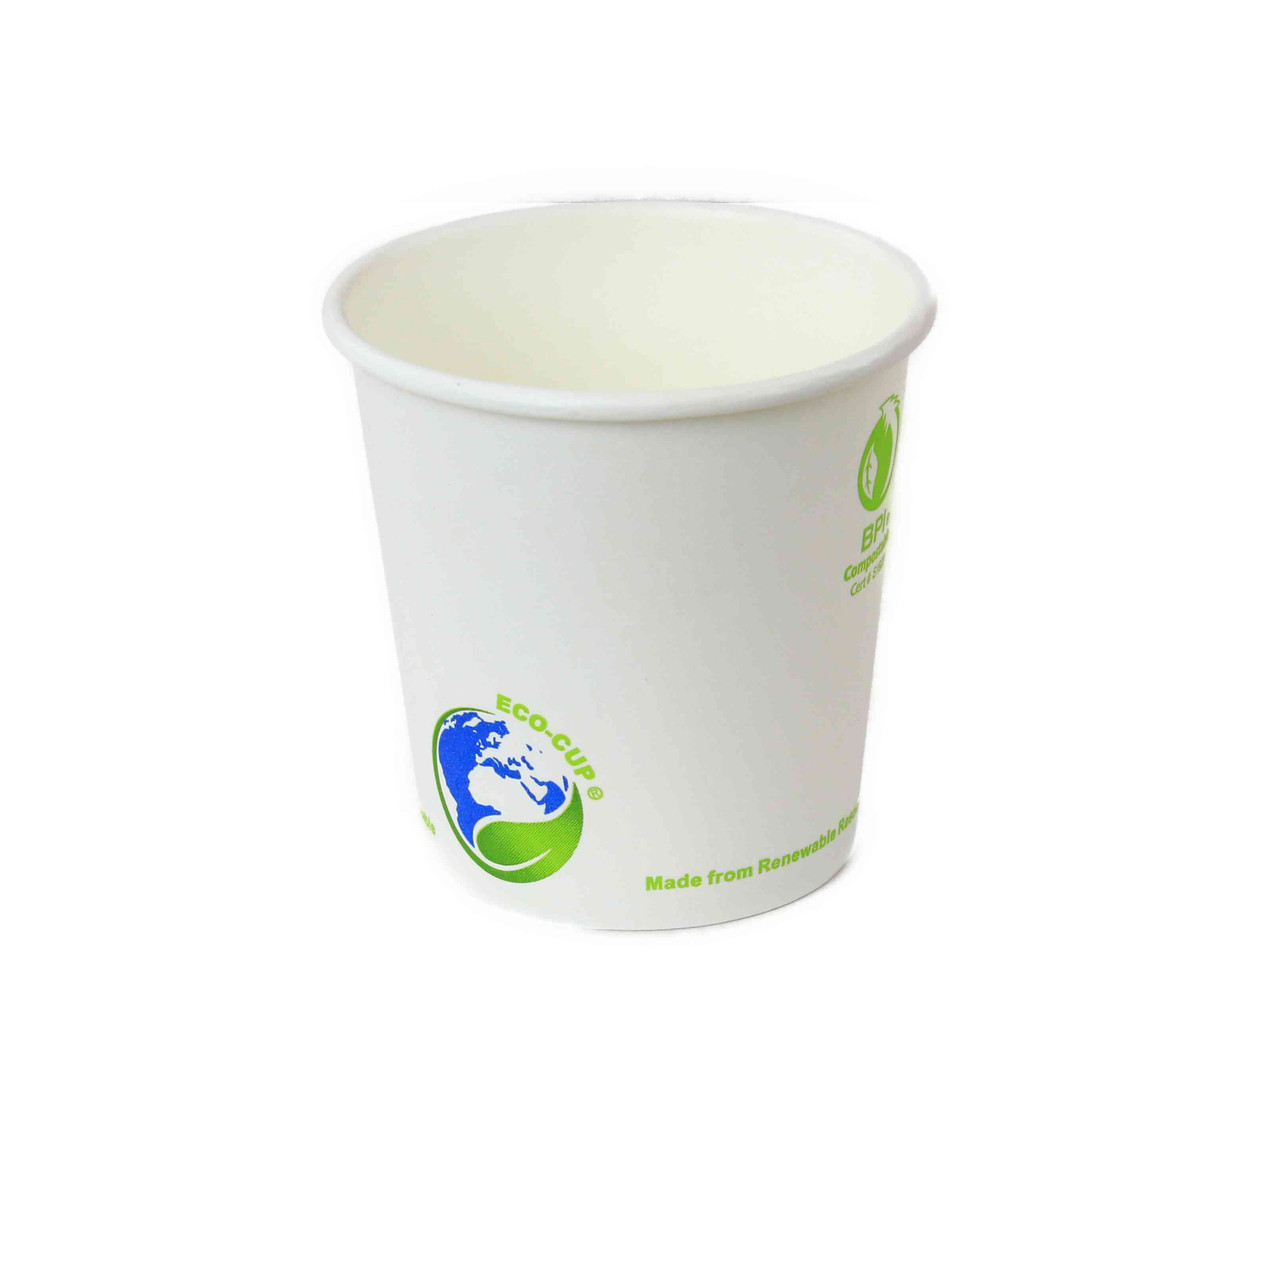 4oz compostable hot cup